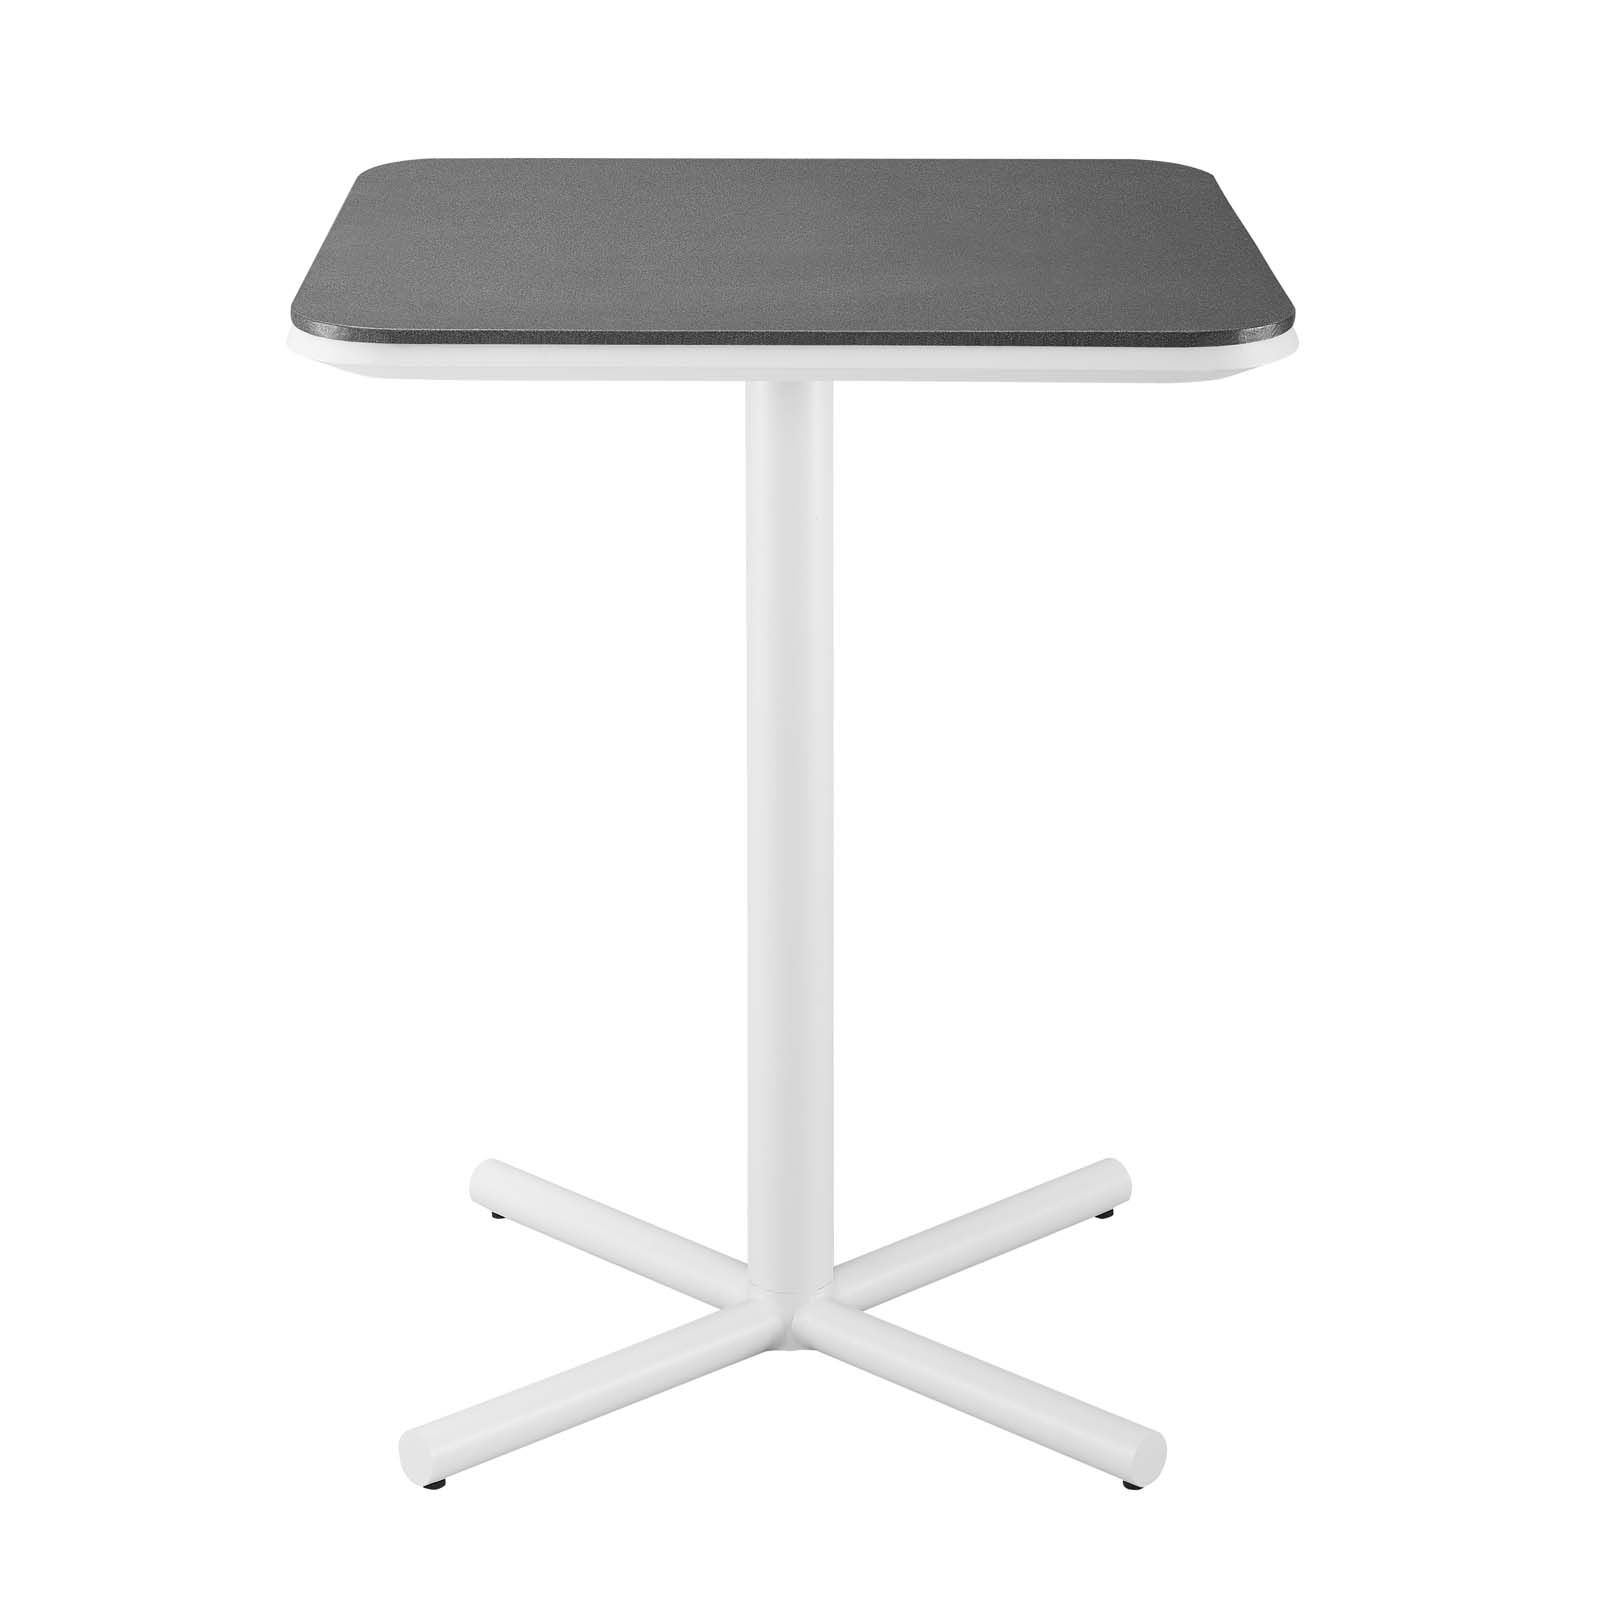 Modway Raleigh Modern Style Aluminum Outdoor Patio Bar Table in White - image 4 of 7